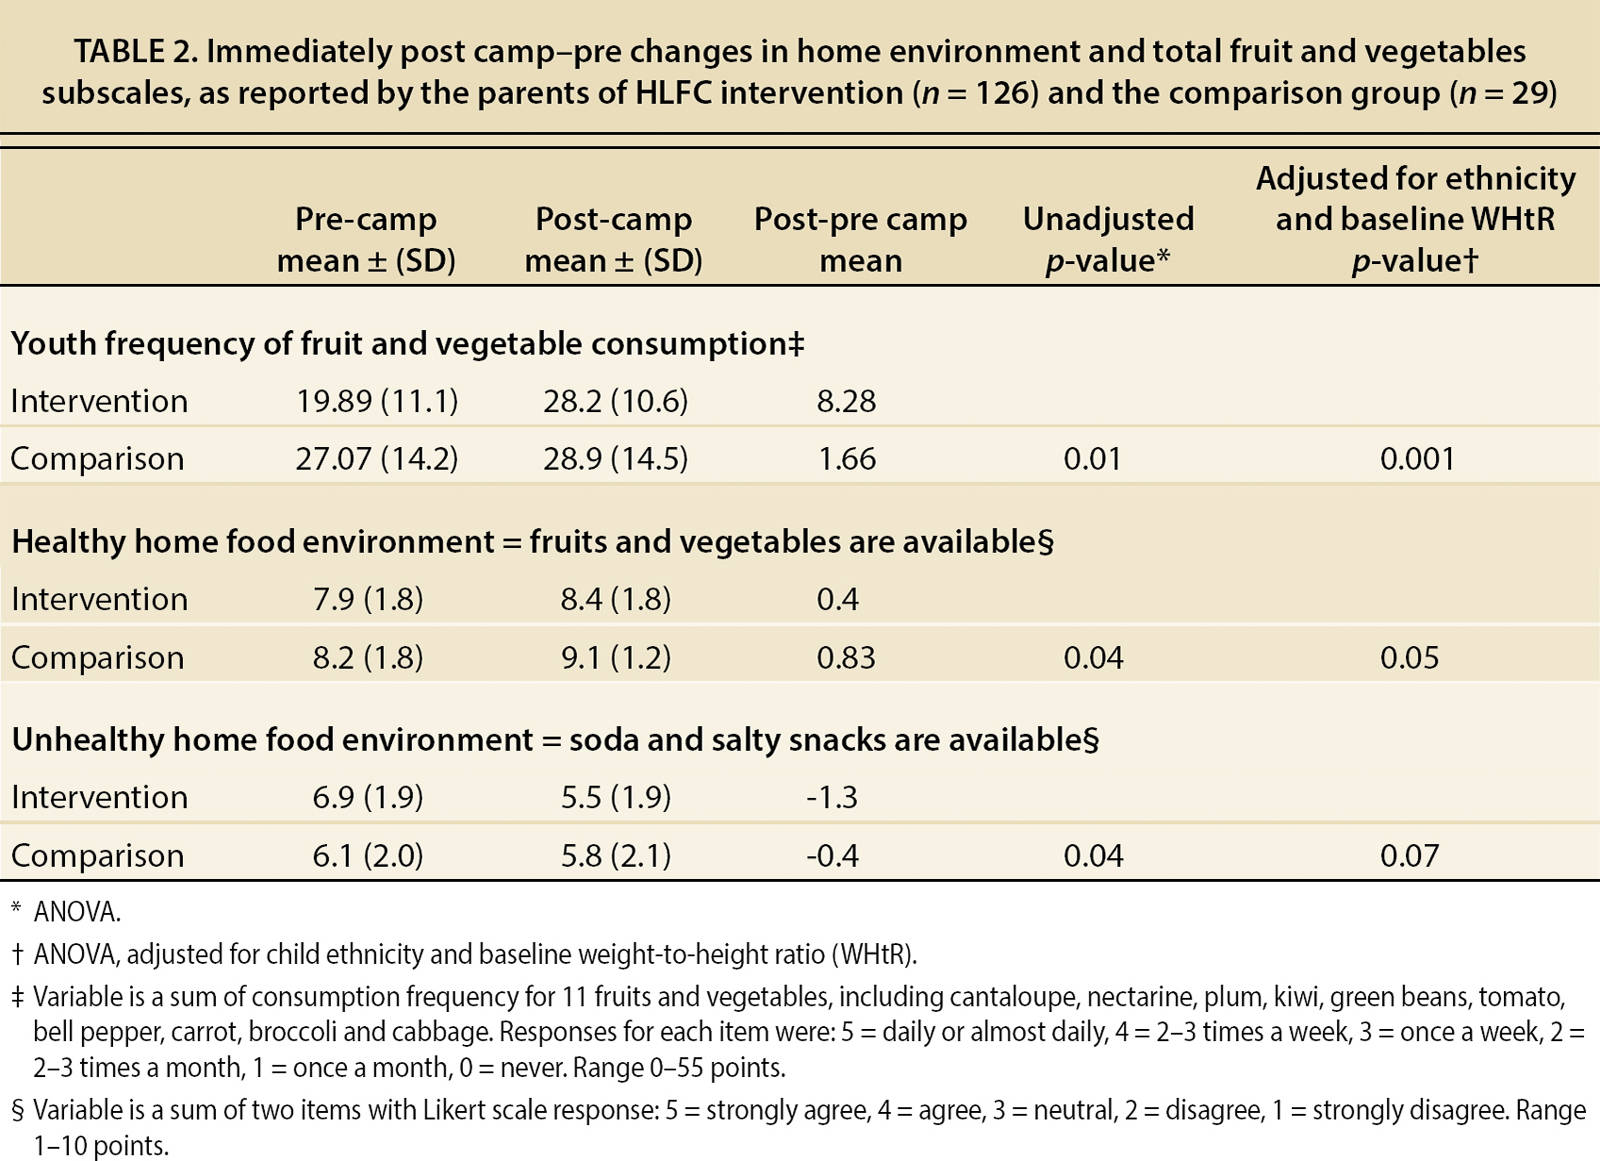 Immediately post camp-pre changes in home environment and total fruit and vegetables subscales, as reported by the parents of HLFC intervention (n = 126) and the comparison group (n = 29)